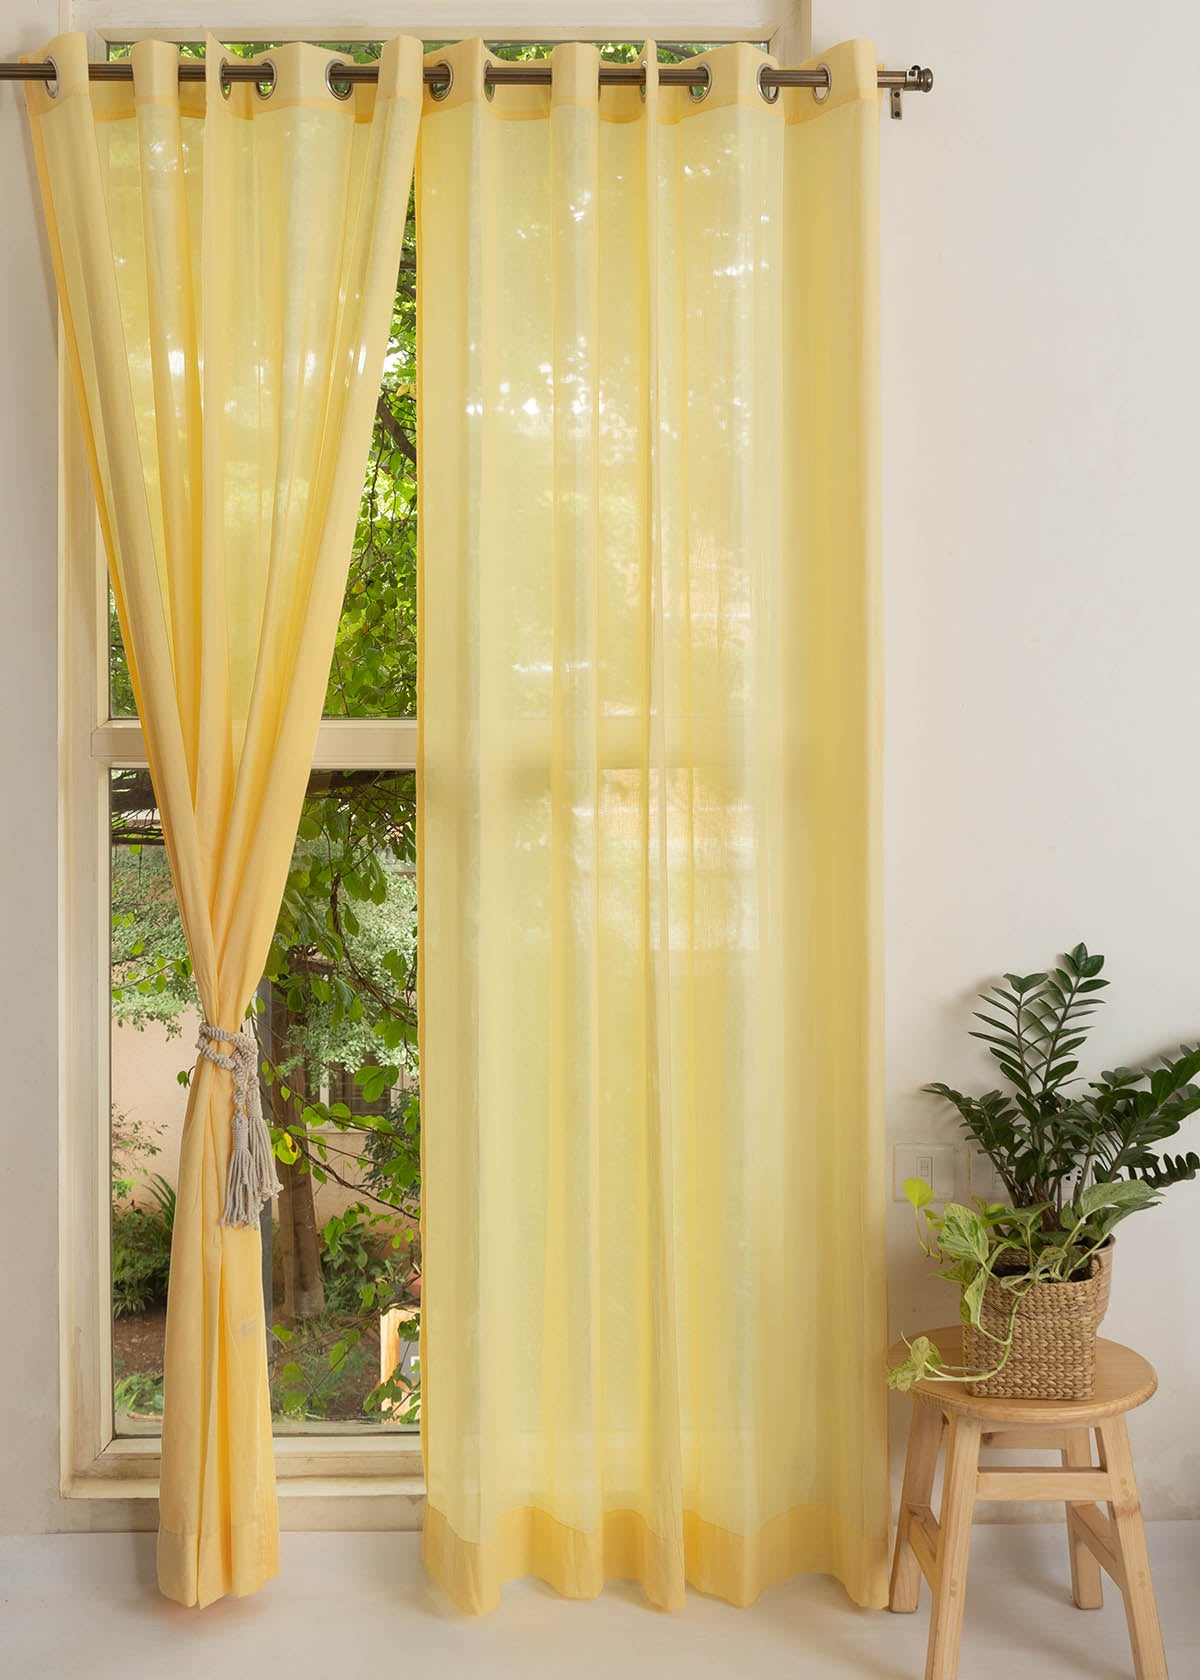 Solid Turmeric yellow sheer 100% Customizable Cotton plain curtain for Living room & bedroom - Light filtering